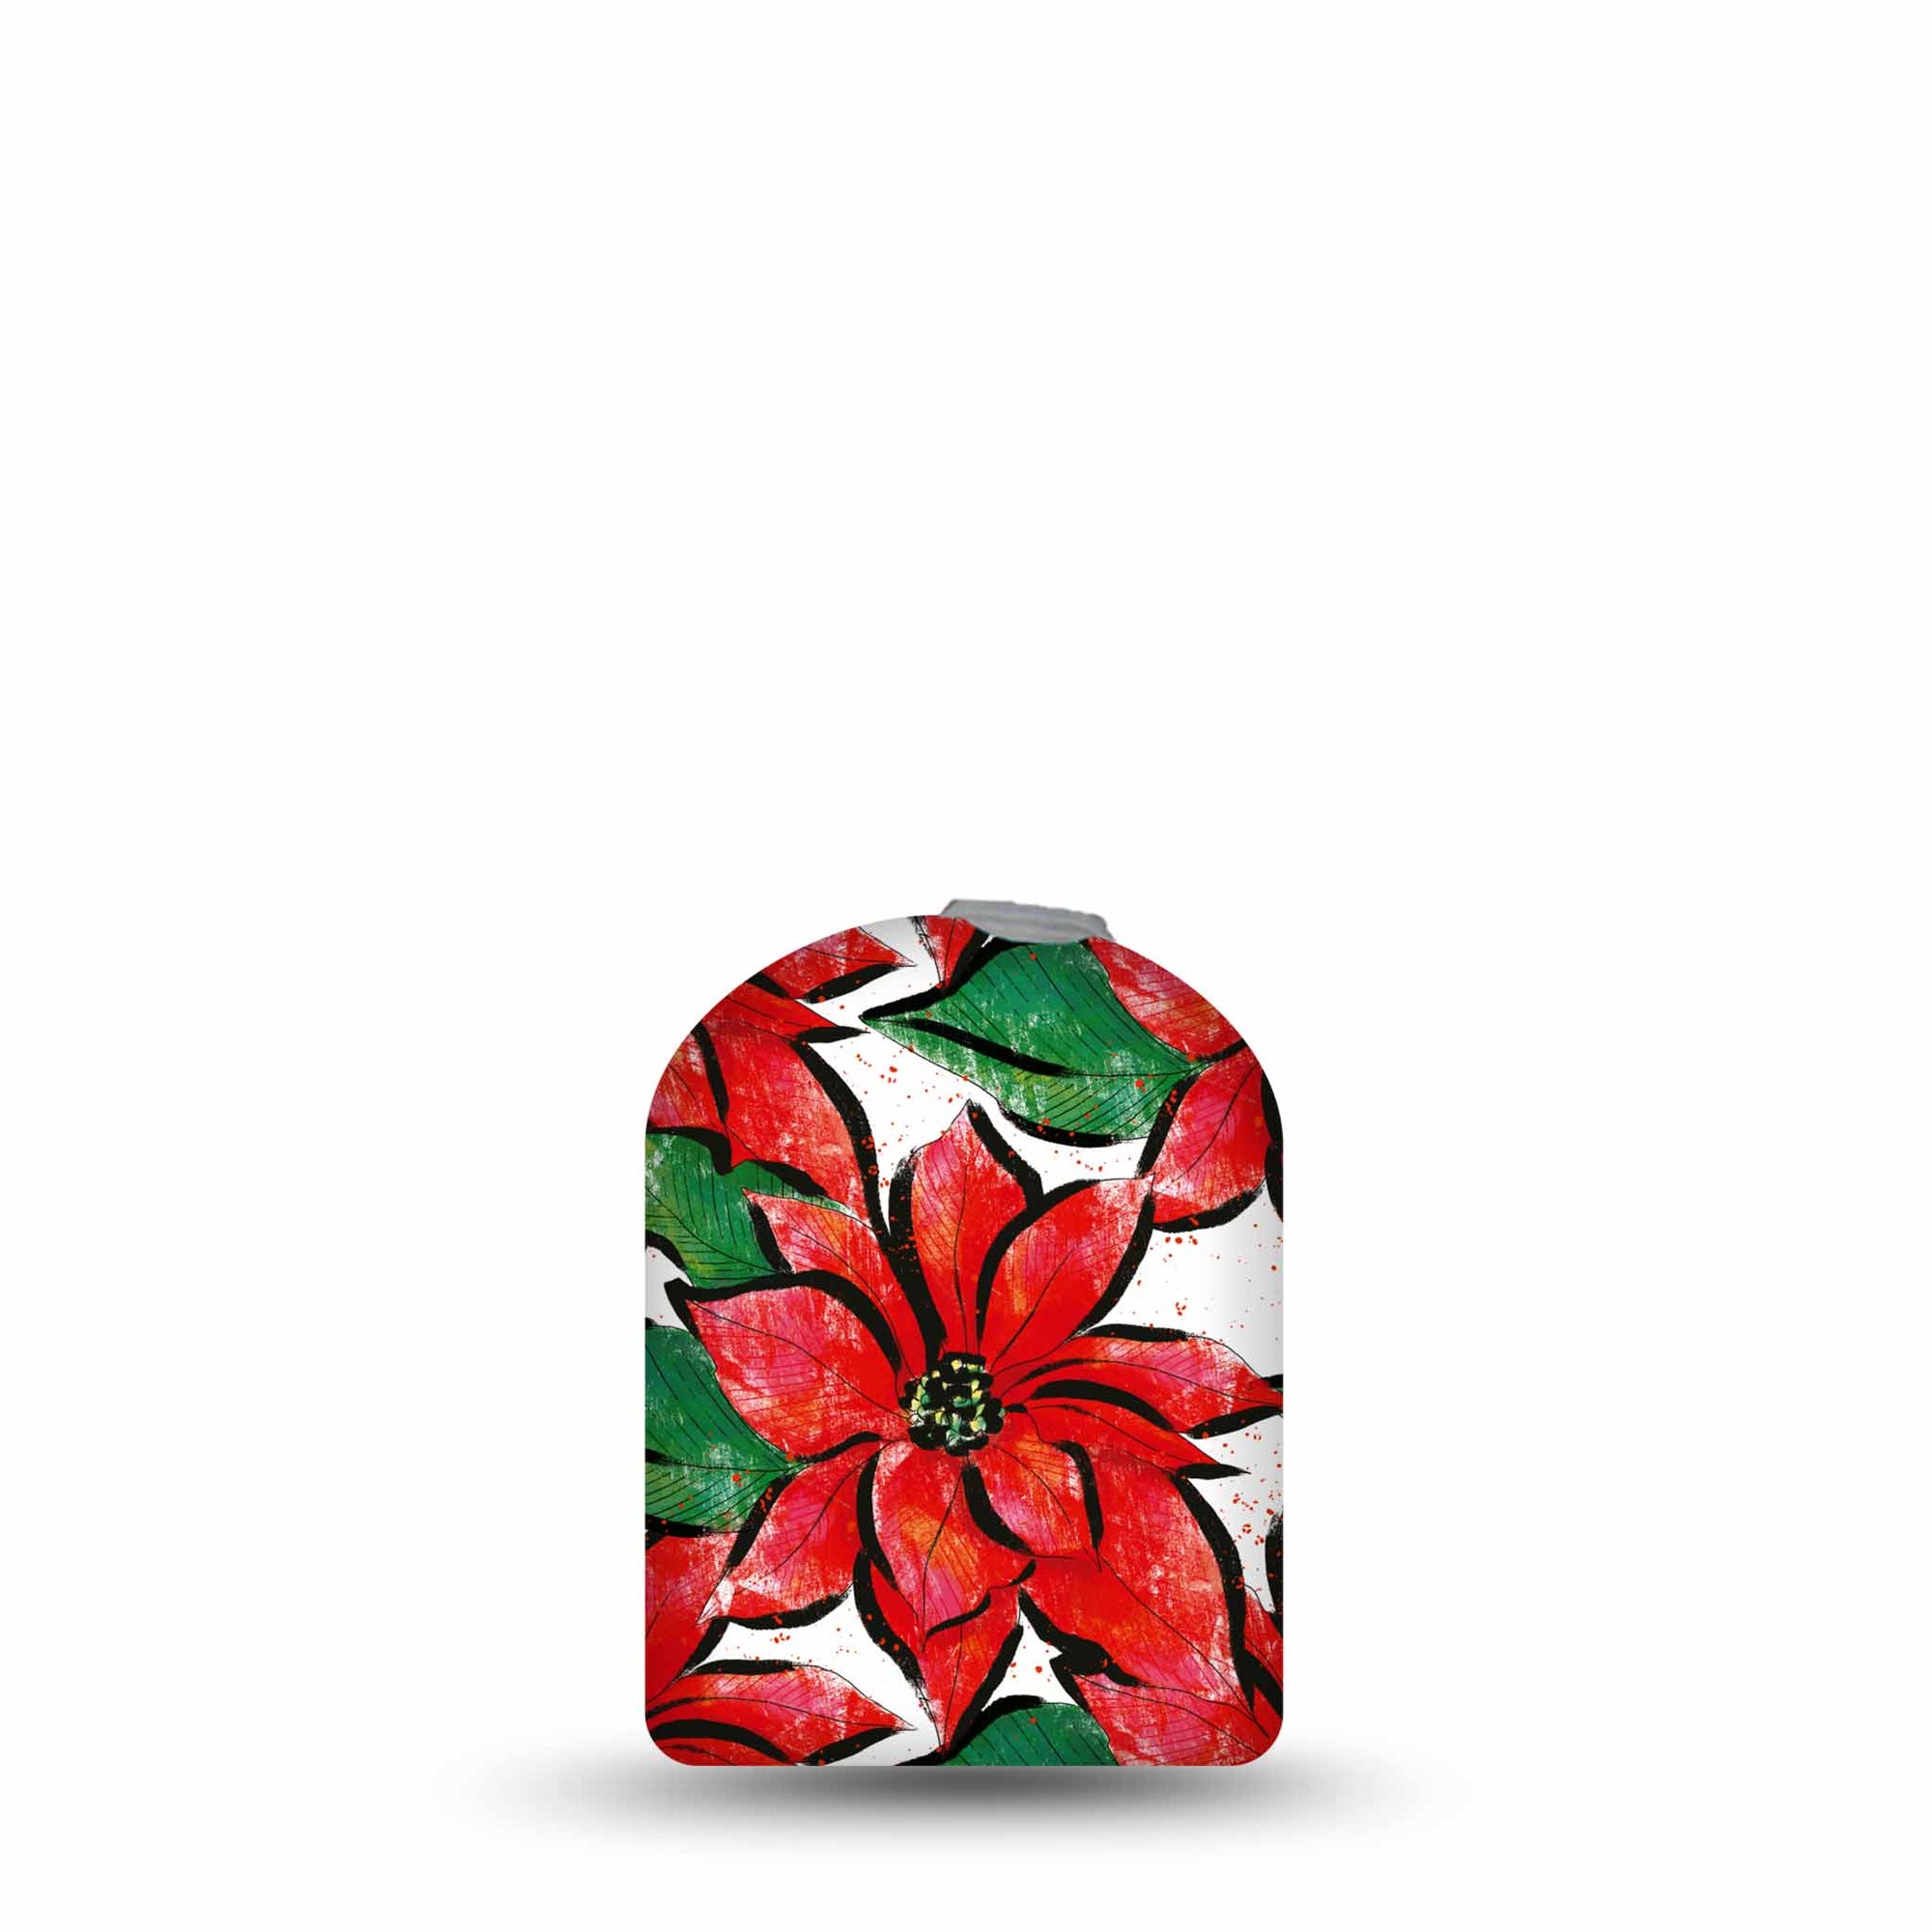 ExpressionMed Poinsettia Omnipod Center Device Sticker, Floral Holiday Design